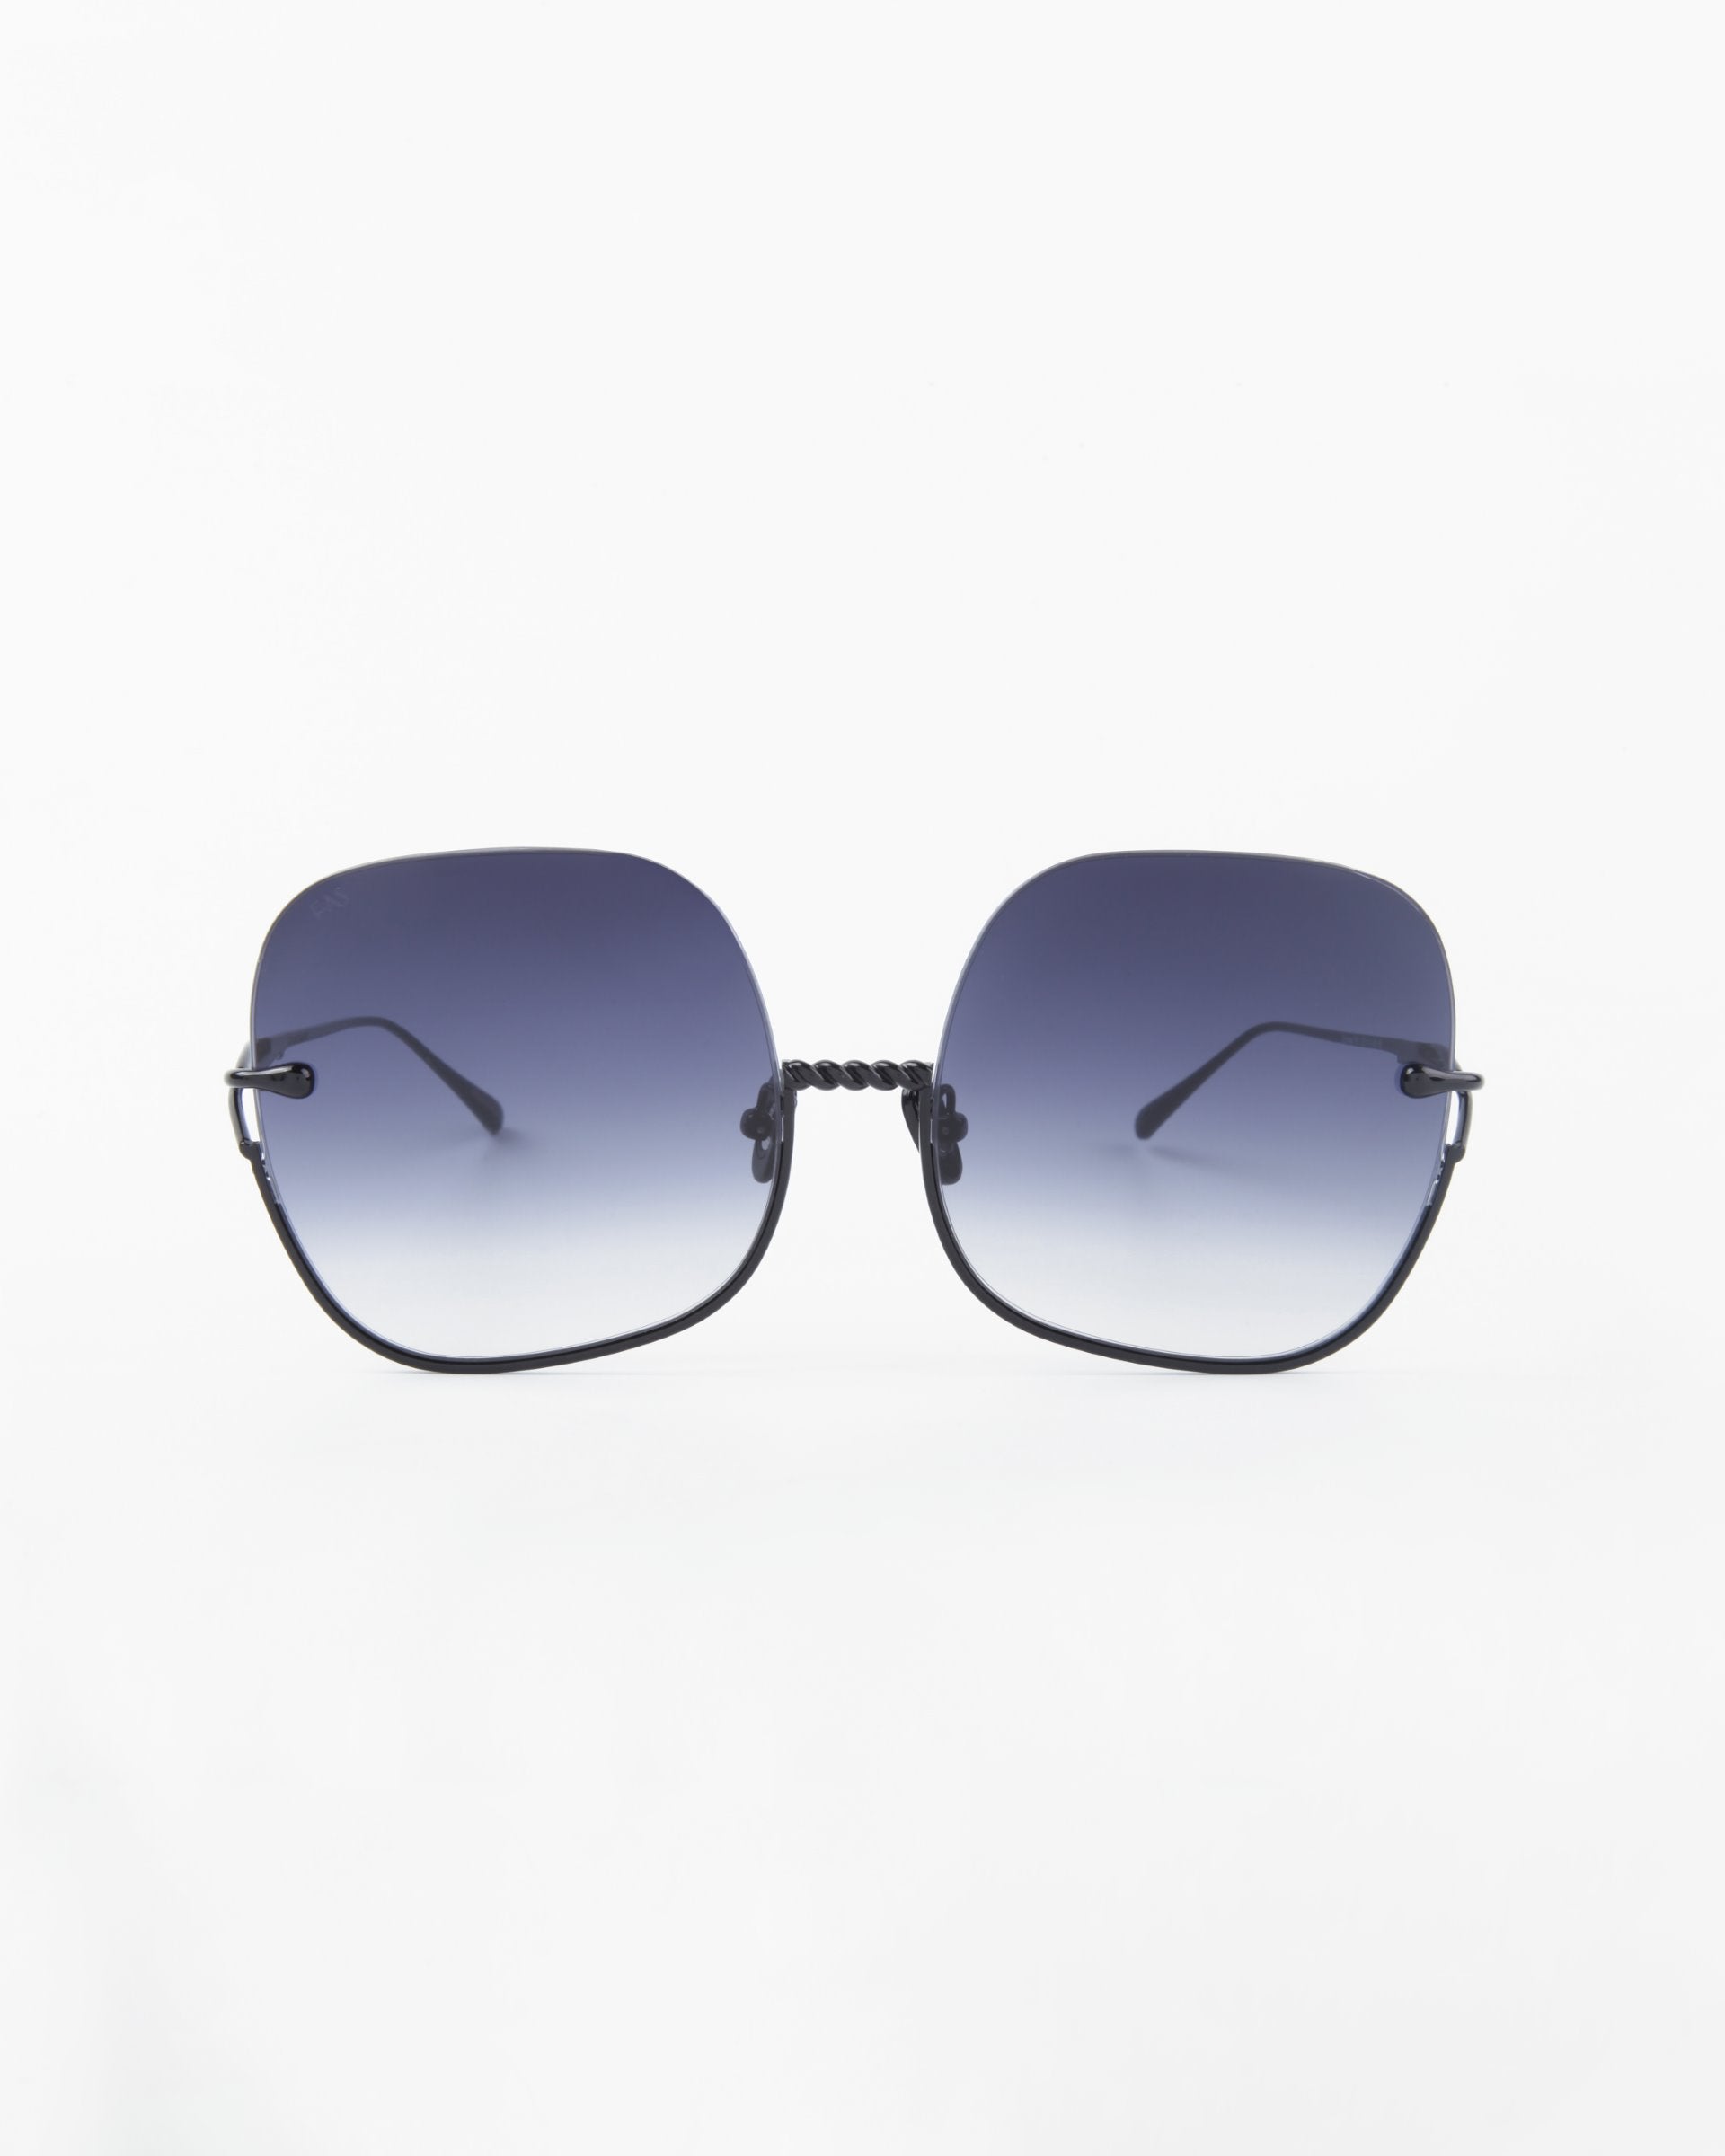 A pair of Duchess by For Art&#39;s Sake®: oversized, square-shaped sunglasses featuring thin black frames and gradient blue lenses that fade from dark at the top to lighter at the bottom. The shatter-resistant lenses offer UVA &amp; UVB protection, ensuring both style and safety. The background is plain white.